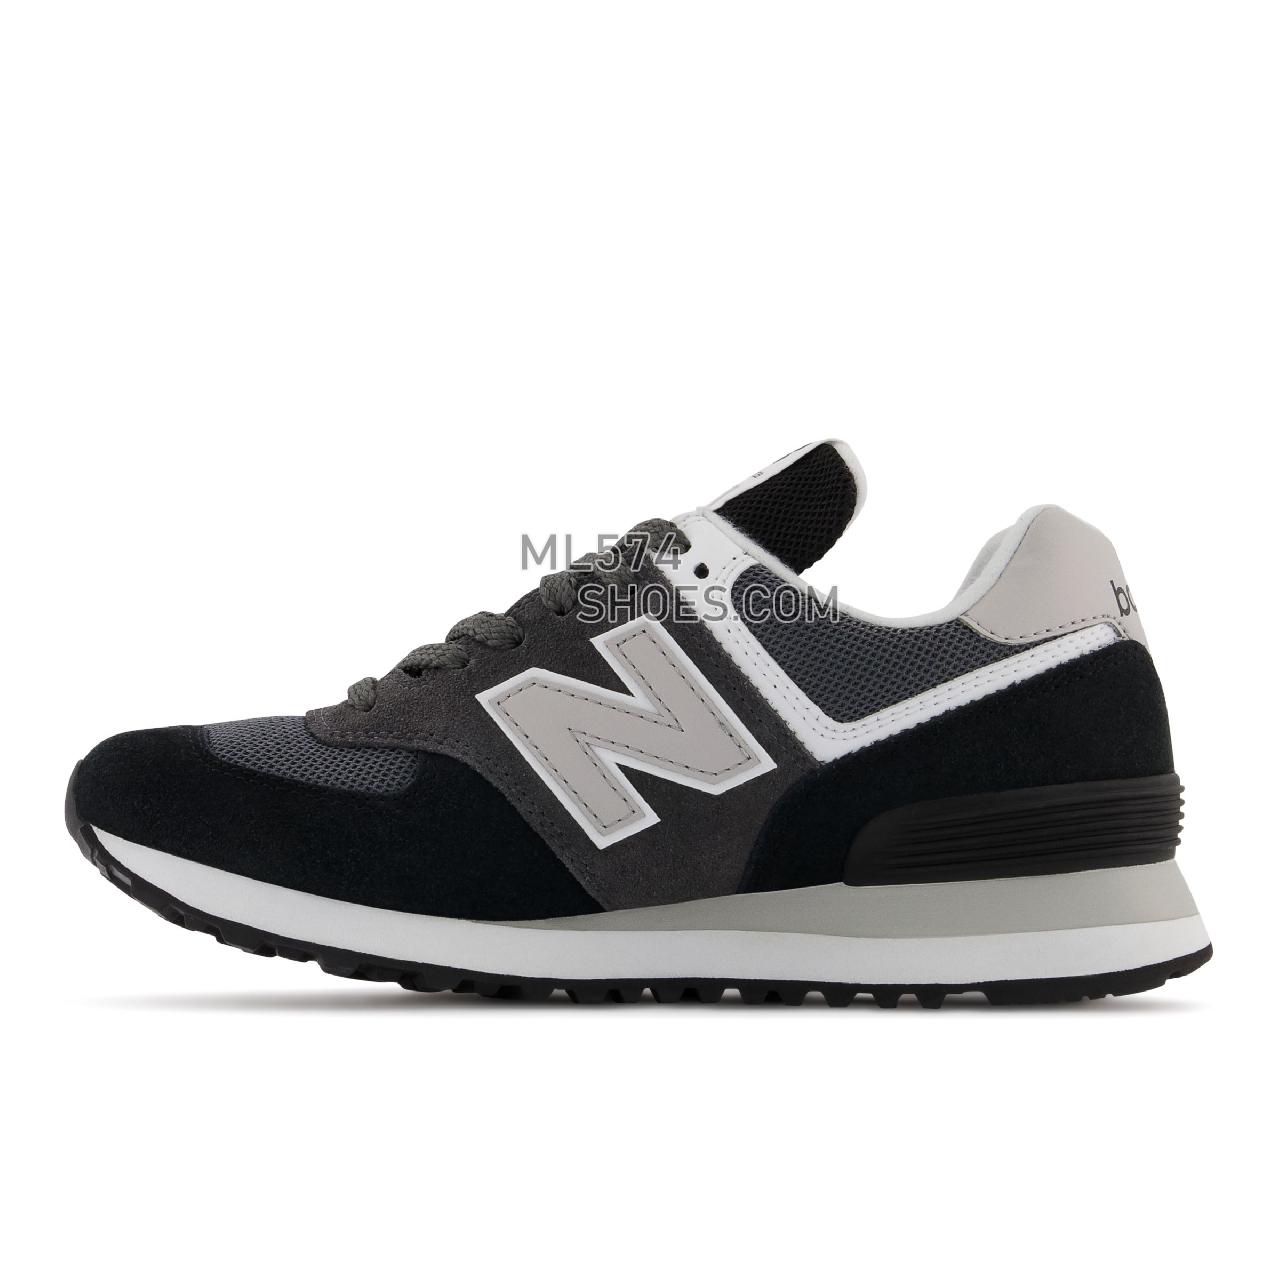 New Balance 574v2 - Women's Classic Sneakers - Black with Magnet - WL574VI1